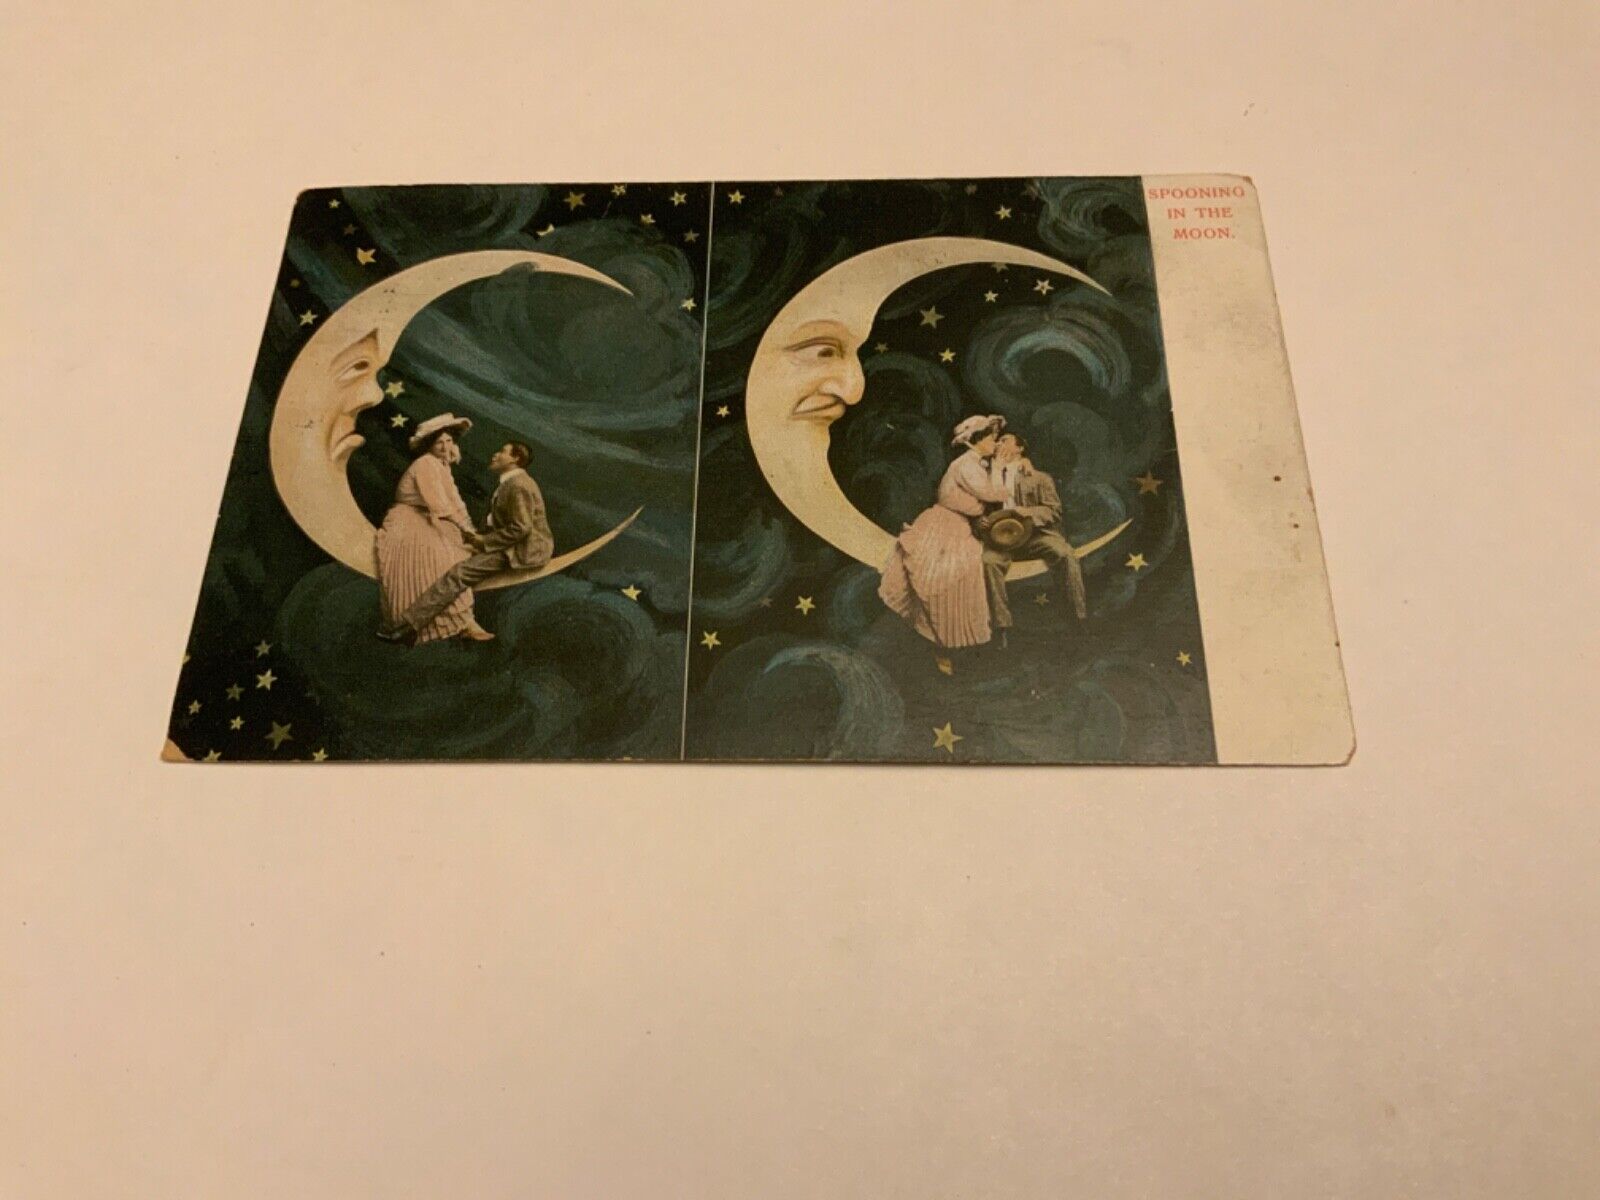 Spooning in the Moon ~ Lovers /Stars / Crescent Moon - 1907 Antique Postcard